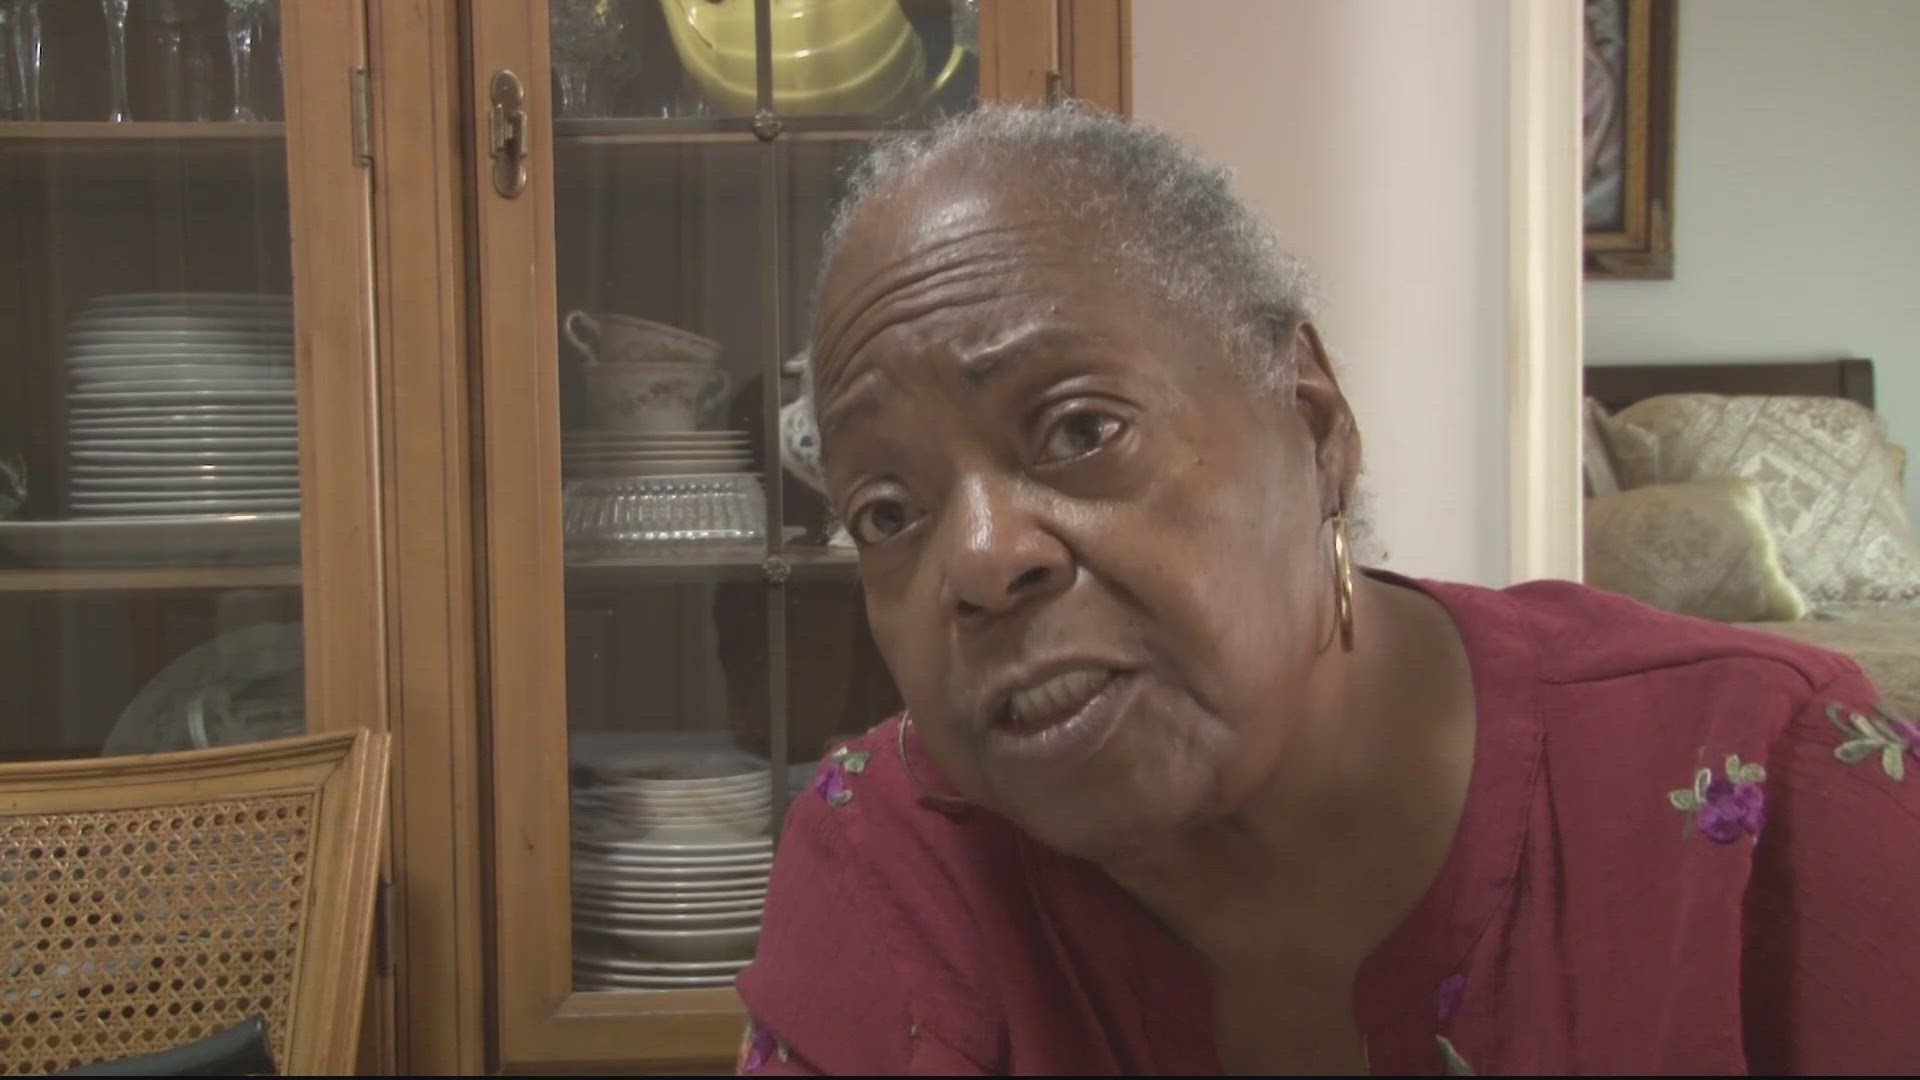 Prince George's County recently took steps to protect renters. But one woman tells our John Henry -- those changes aren't helping her situation.